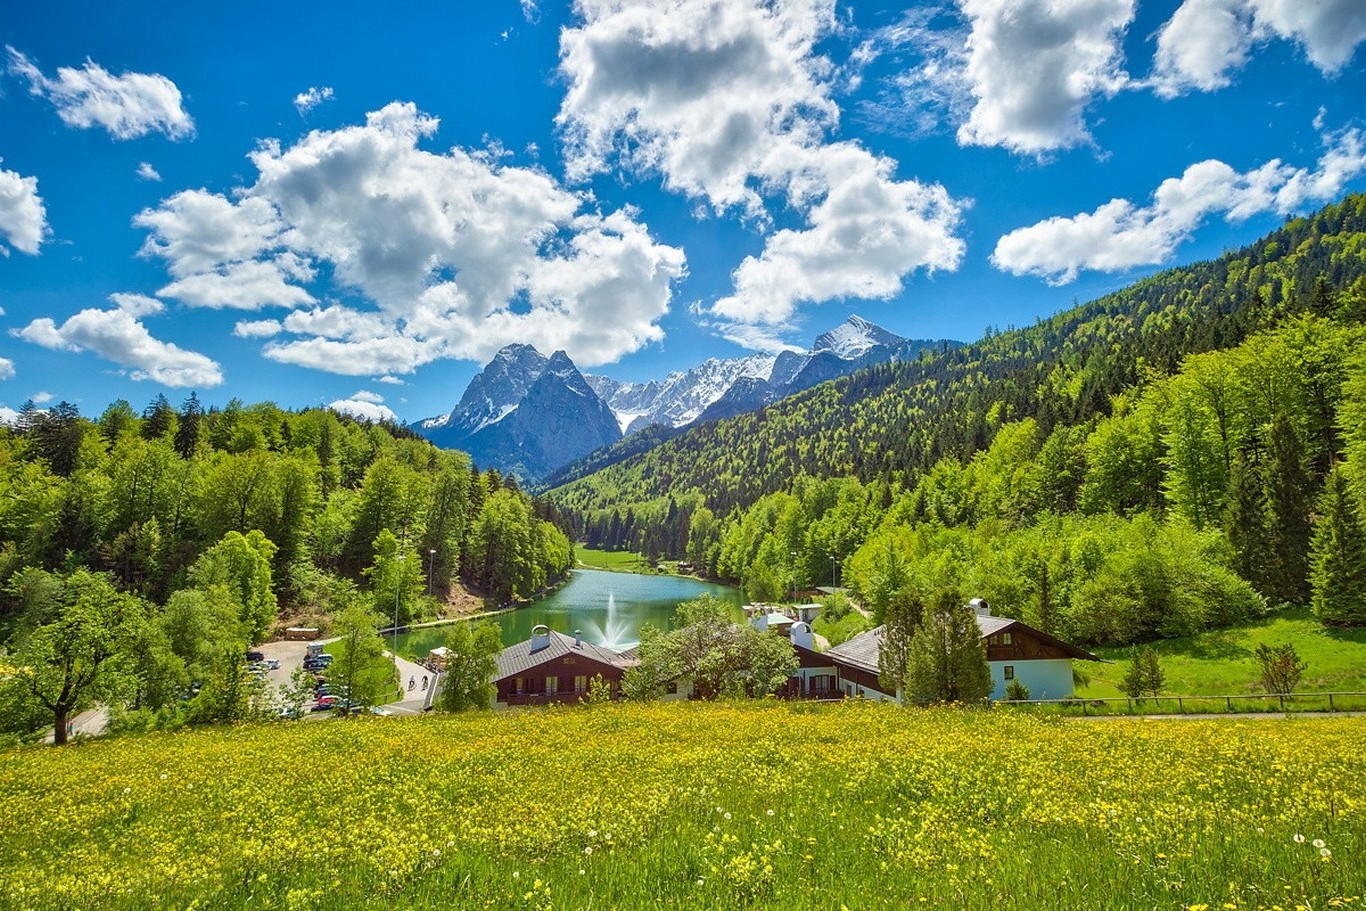 lake, Germany, Summer, Clouds, Green, House, Wildflowers, Mountain, Forest, Nature, Landscape, Field Wallpaper